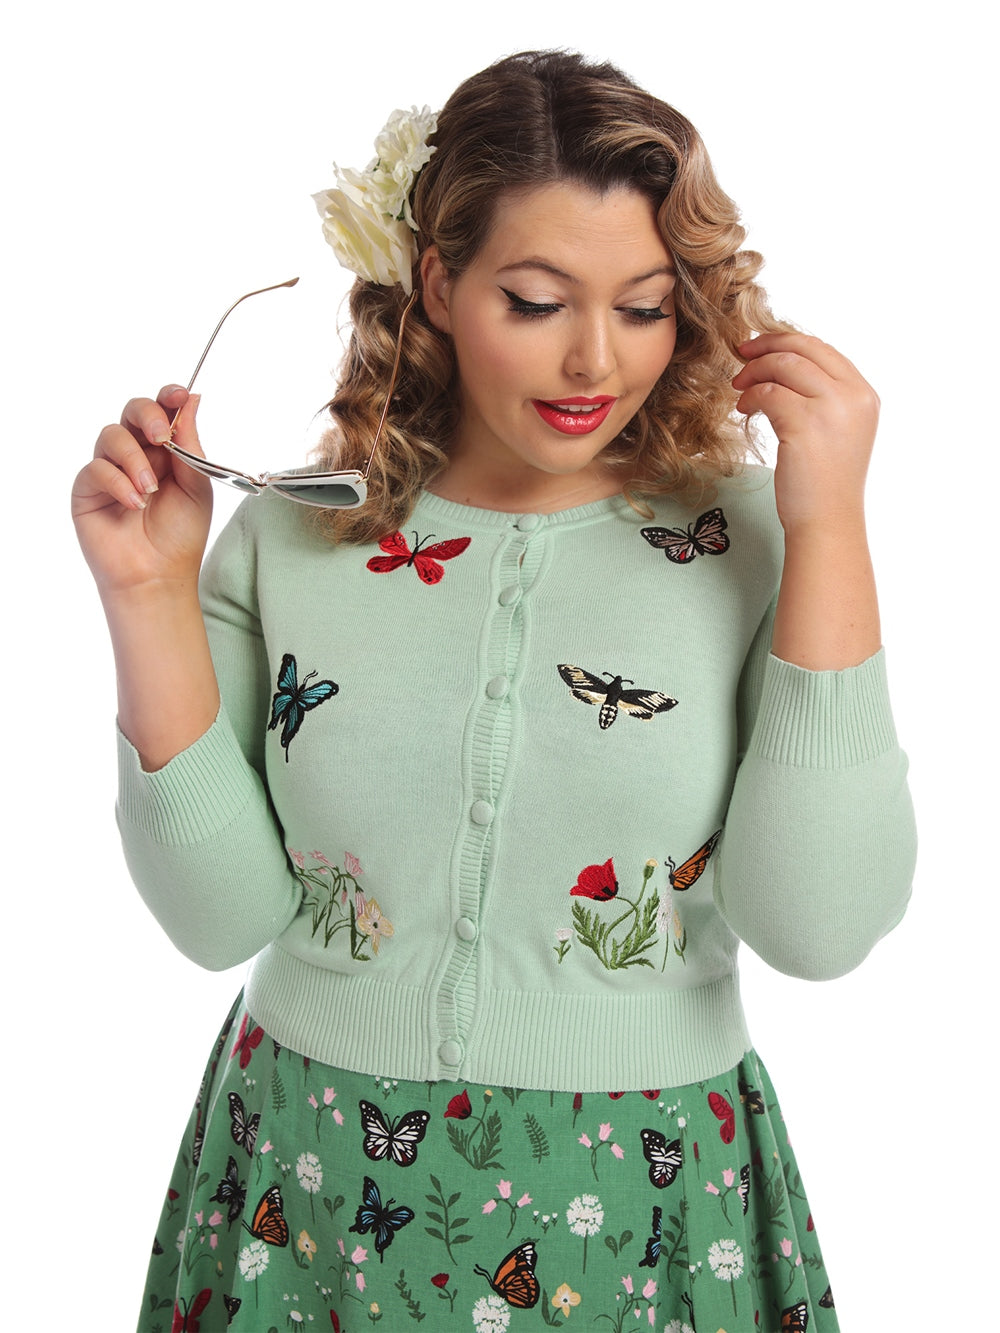 vintage model holding sunglasses wearing a hair flower and mint green cardigan with embroidered colourful butterflies and flowers on the front